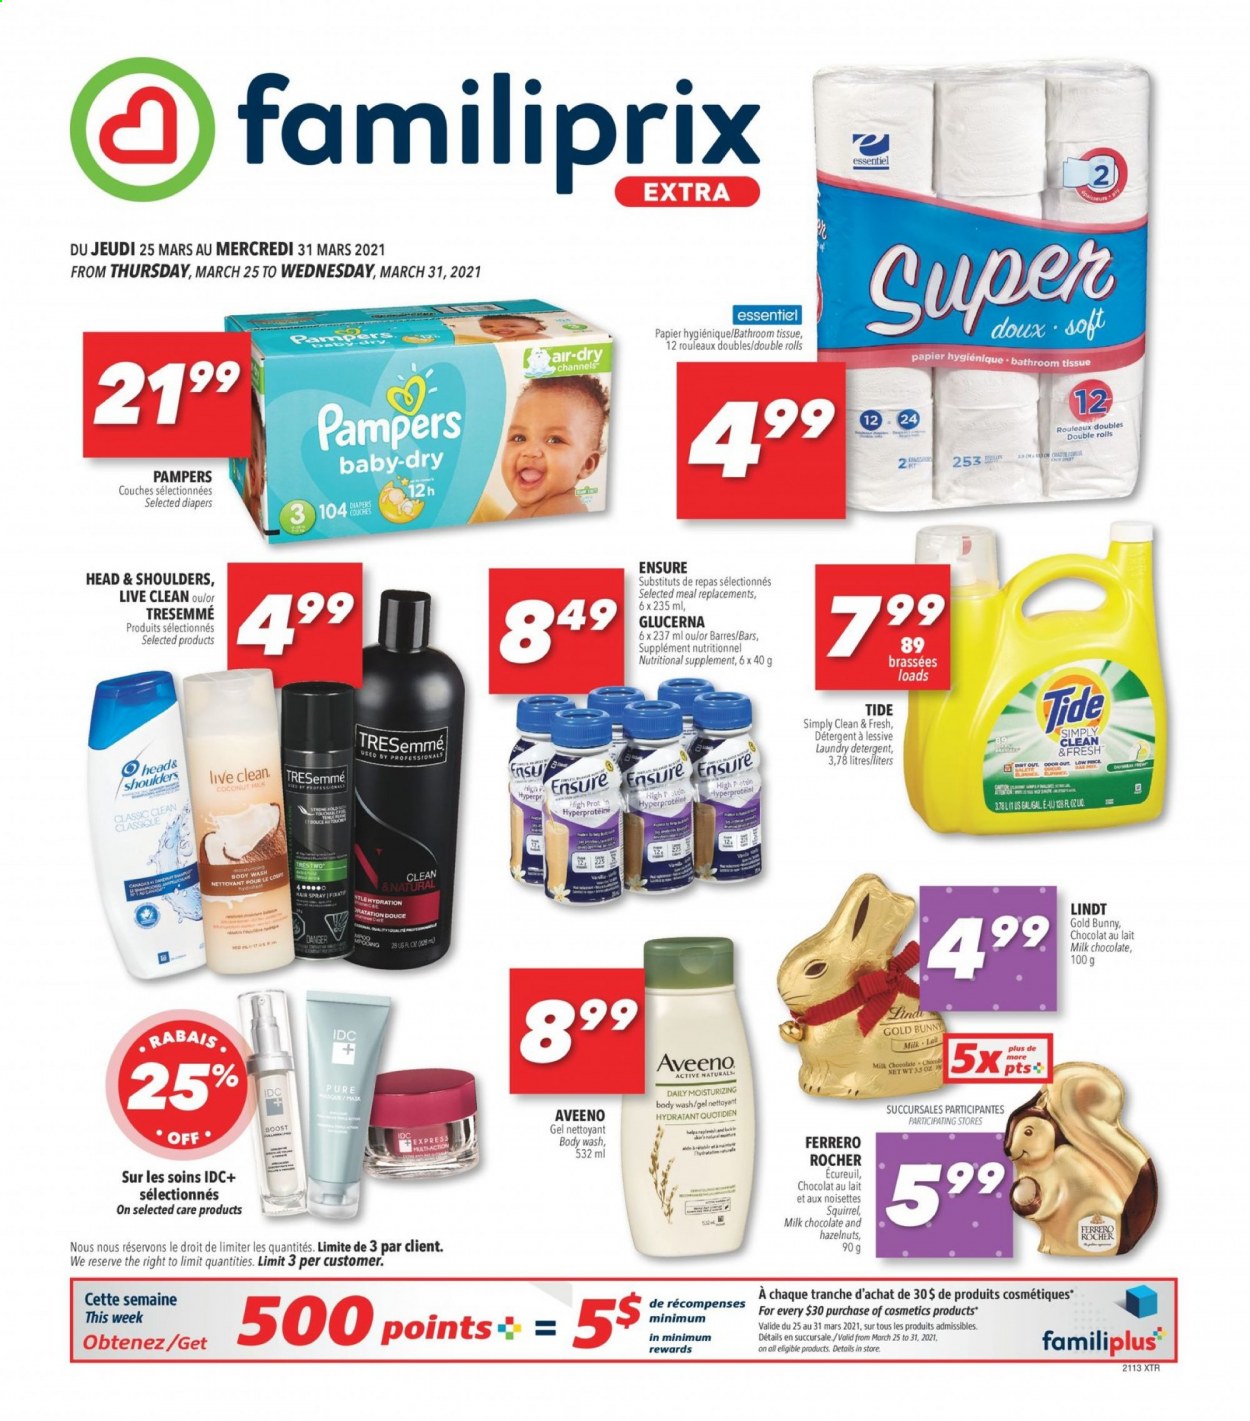 thumbnail - Familiprix Extra Flyer - March 25, 2021 - March 31, 2021 - Sales products - milk chocolate, Mars, coconut milk, Boost, nappies, Aveeno, bath tissue, Tide, laundry detergent, body wash, TRESemmé, Hask, Glucerna, nutritional supplement, Head & Shoulders, Pampers. Page 1.